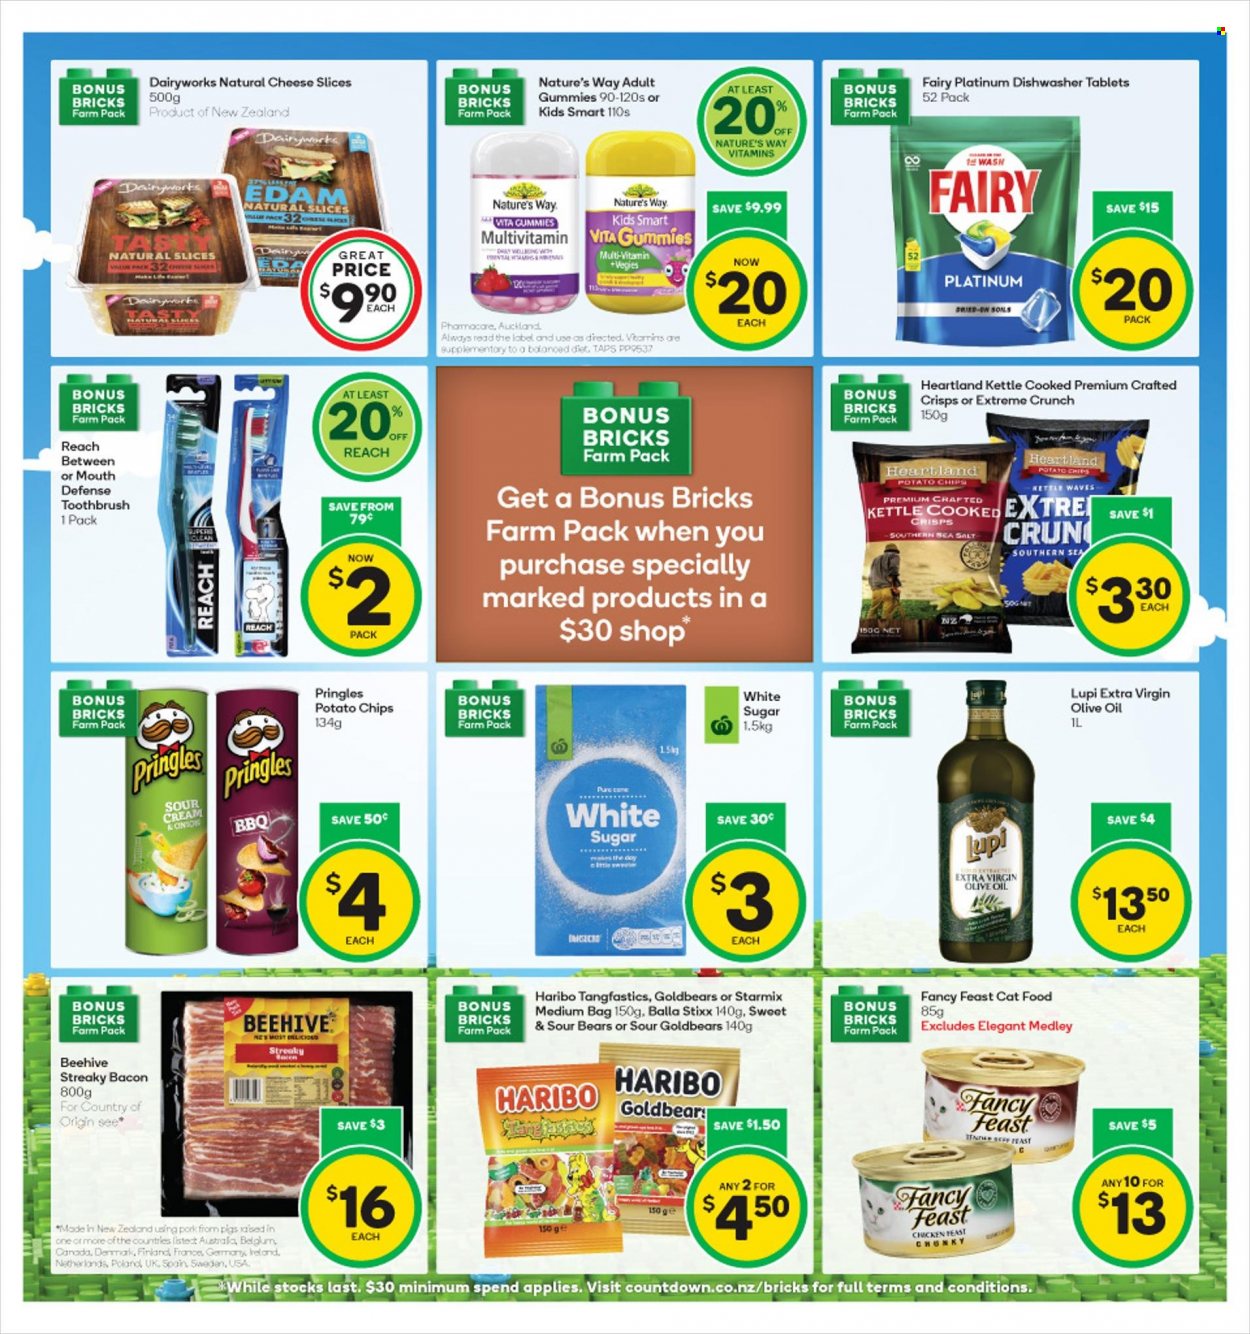 thumbnail - Countdown mailer - 28.11.2022 - 04.12.2022 - Sales products - bacon, streaky bacon, edam cheese, sliced cheese, cheese, Haribo, potato chips, Pringles, chips, Heartland, sugar, extra virgin olive oil, olive oil, oil, Fairy, dishwasher cleaner, dishwasher tablets, toothbrush, animal food, cat food, Fancy Feast, multivitamin. Page 5.